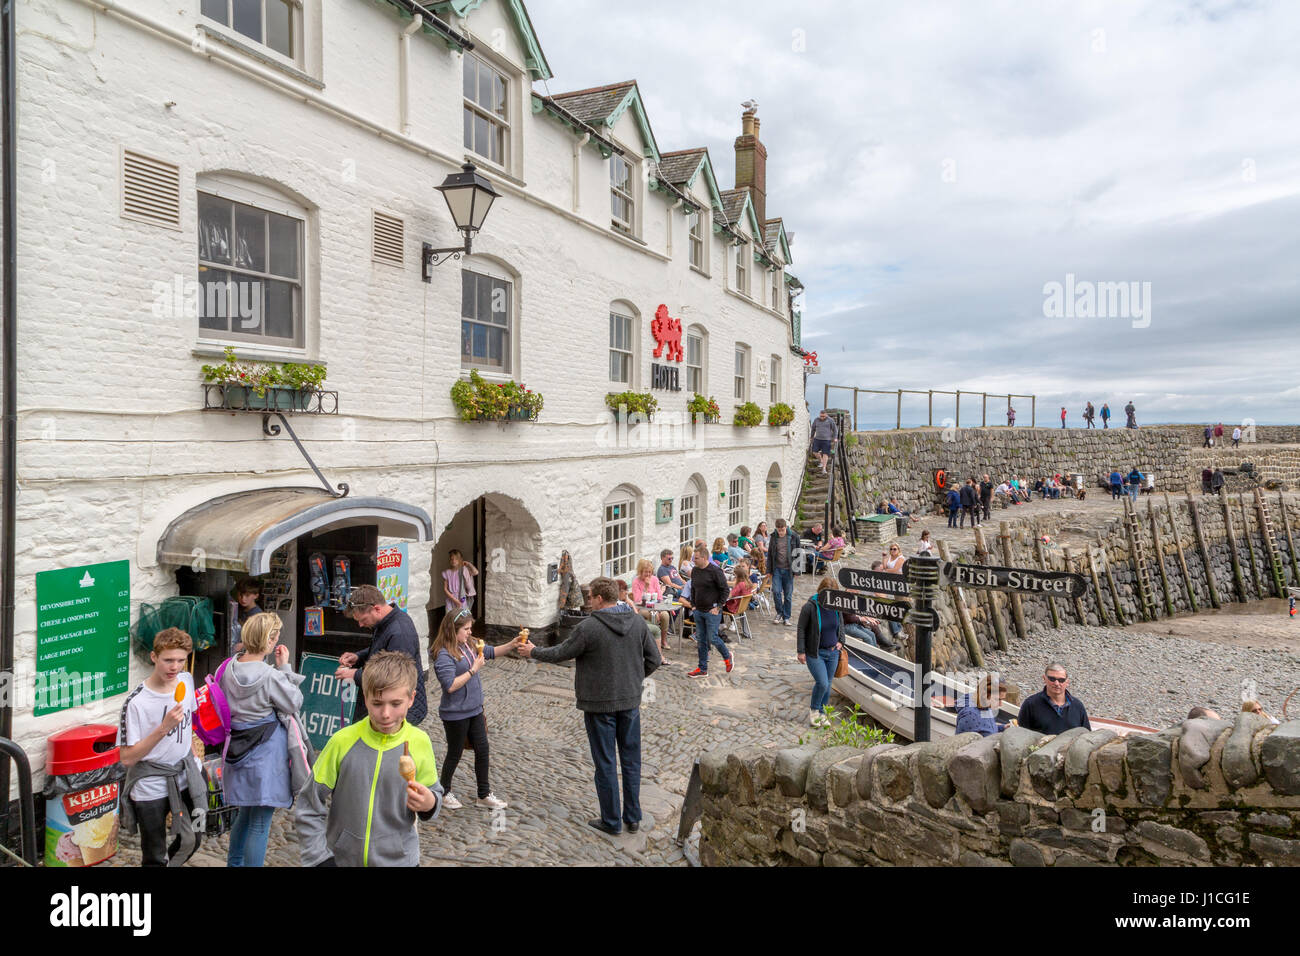 The Red Lion Hotel, Hartland Devon Heritage Coast,The Quay,North Devon,UK,England. A area of outstanding natural beauty AONB Stock Photo